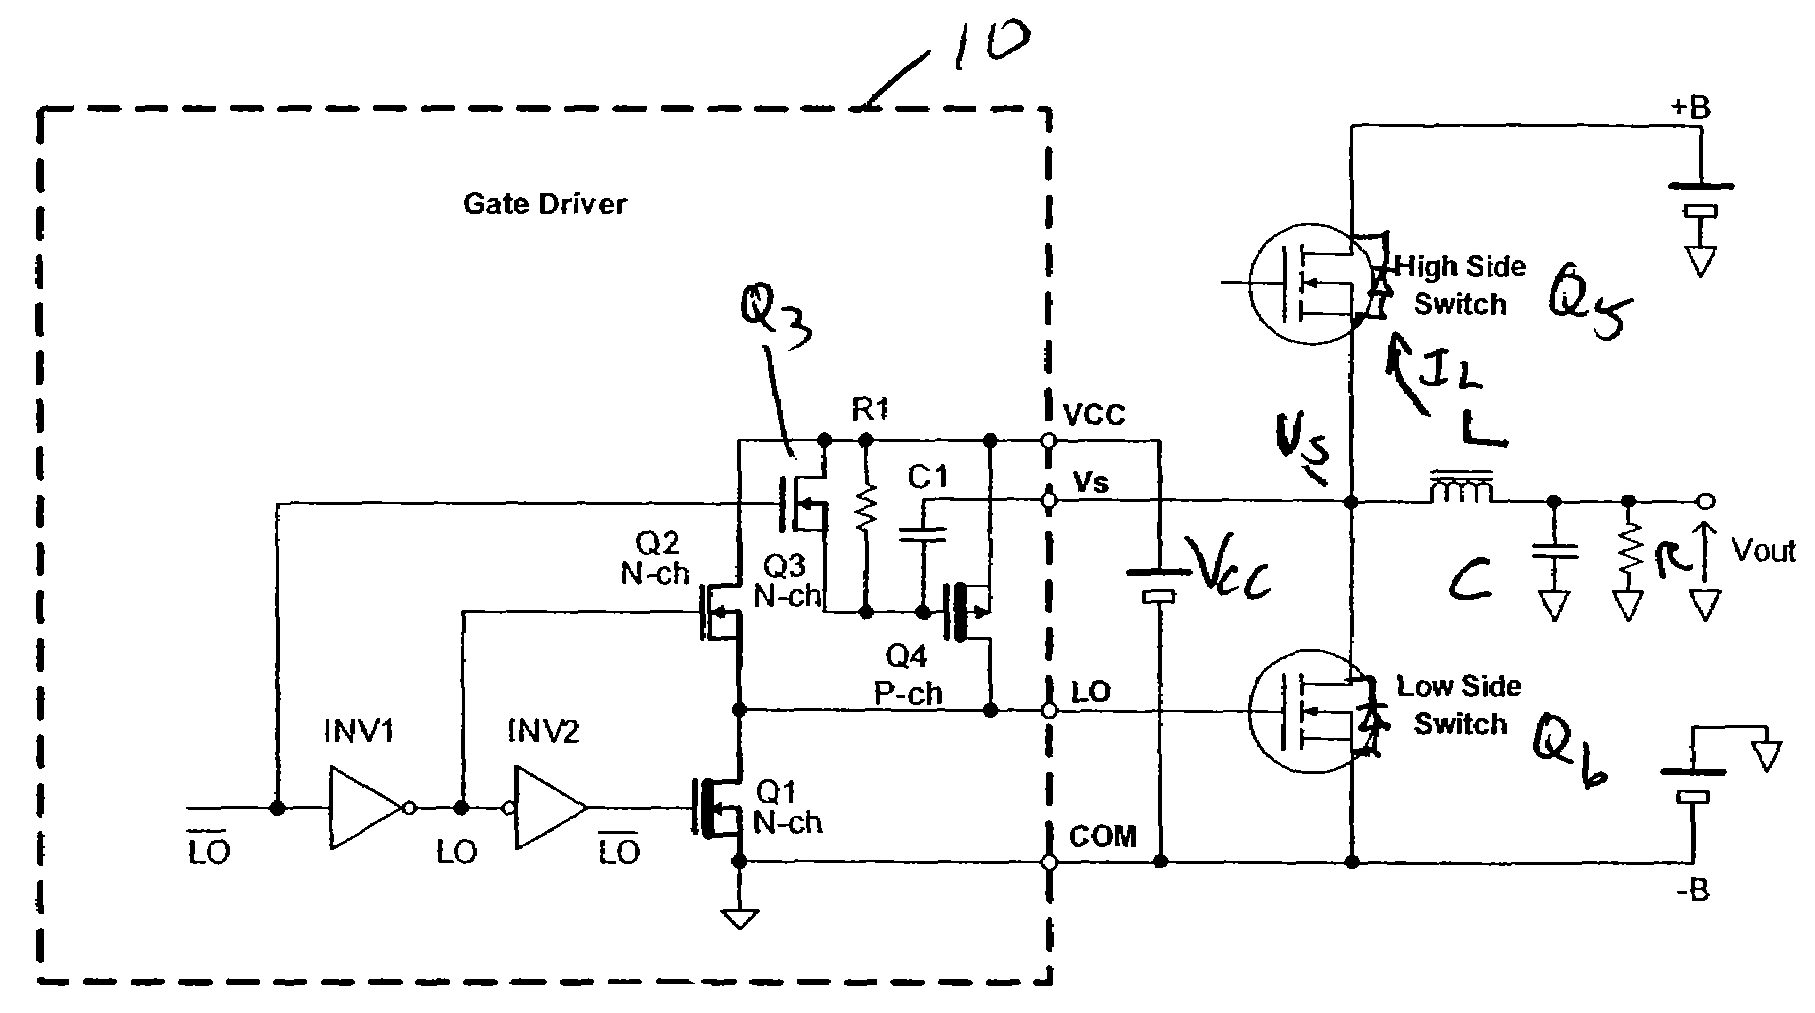 Gate drive for lower switching noise emission